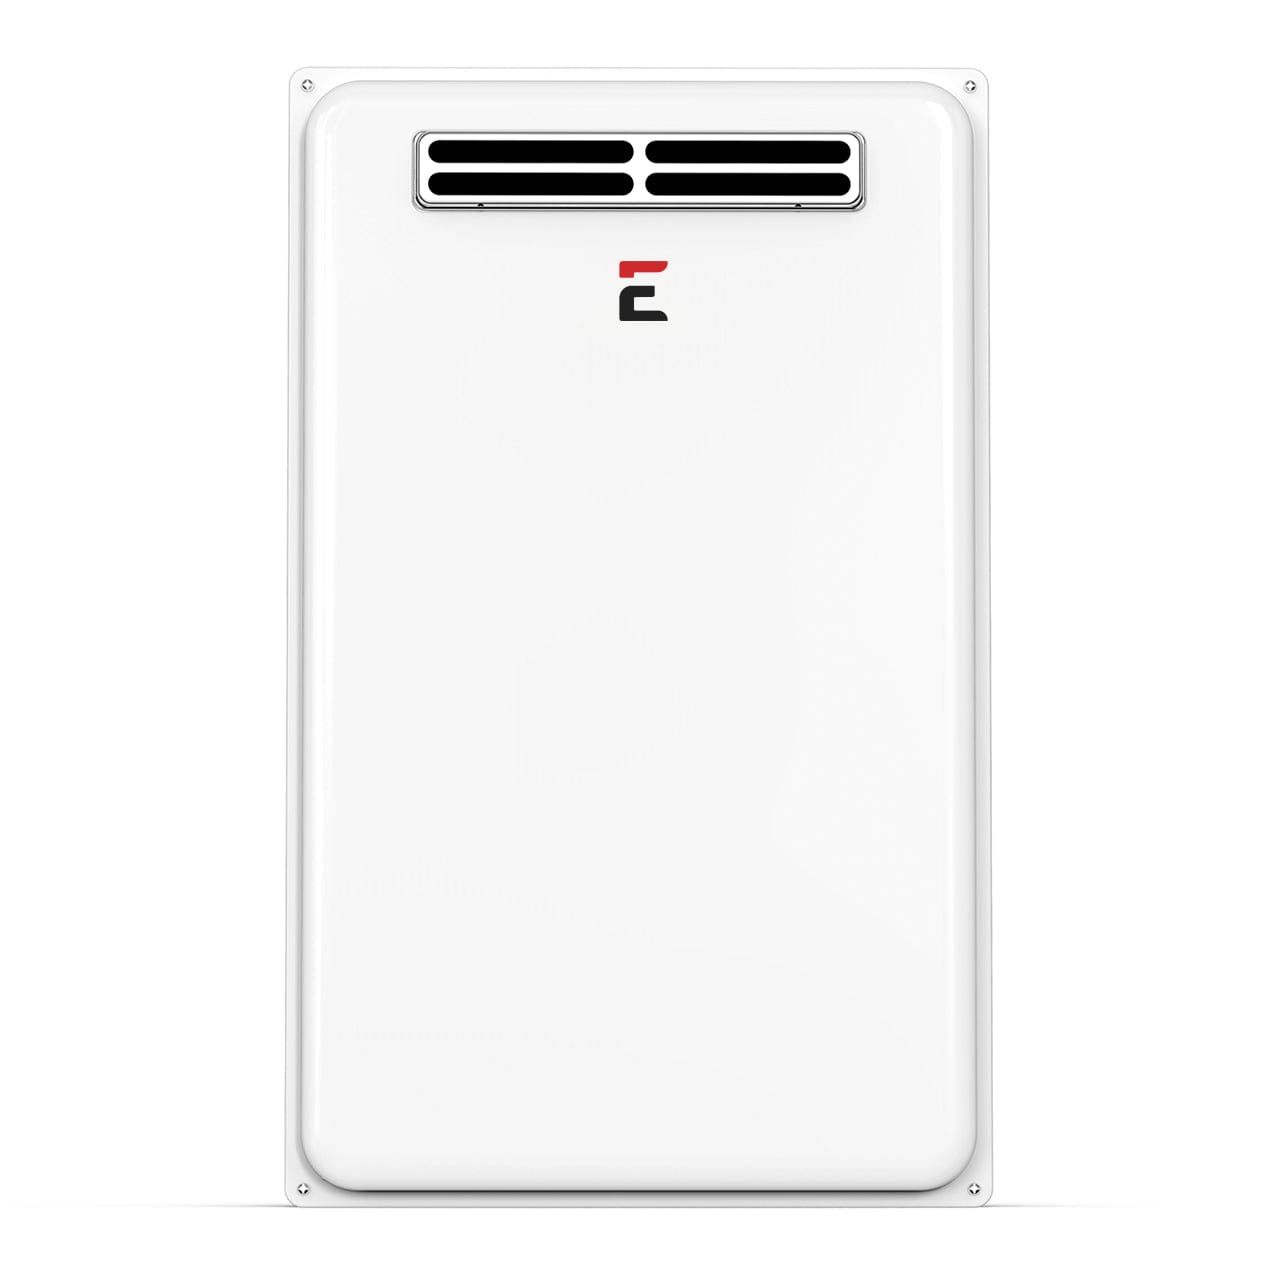 Eccotemp Heaters Eccotemp 45H Outdoor 6.8 GPM Natural Gas Tankless Water Heater